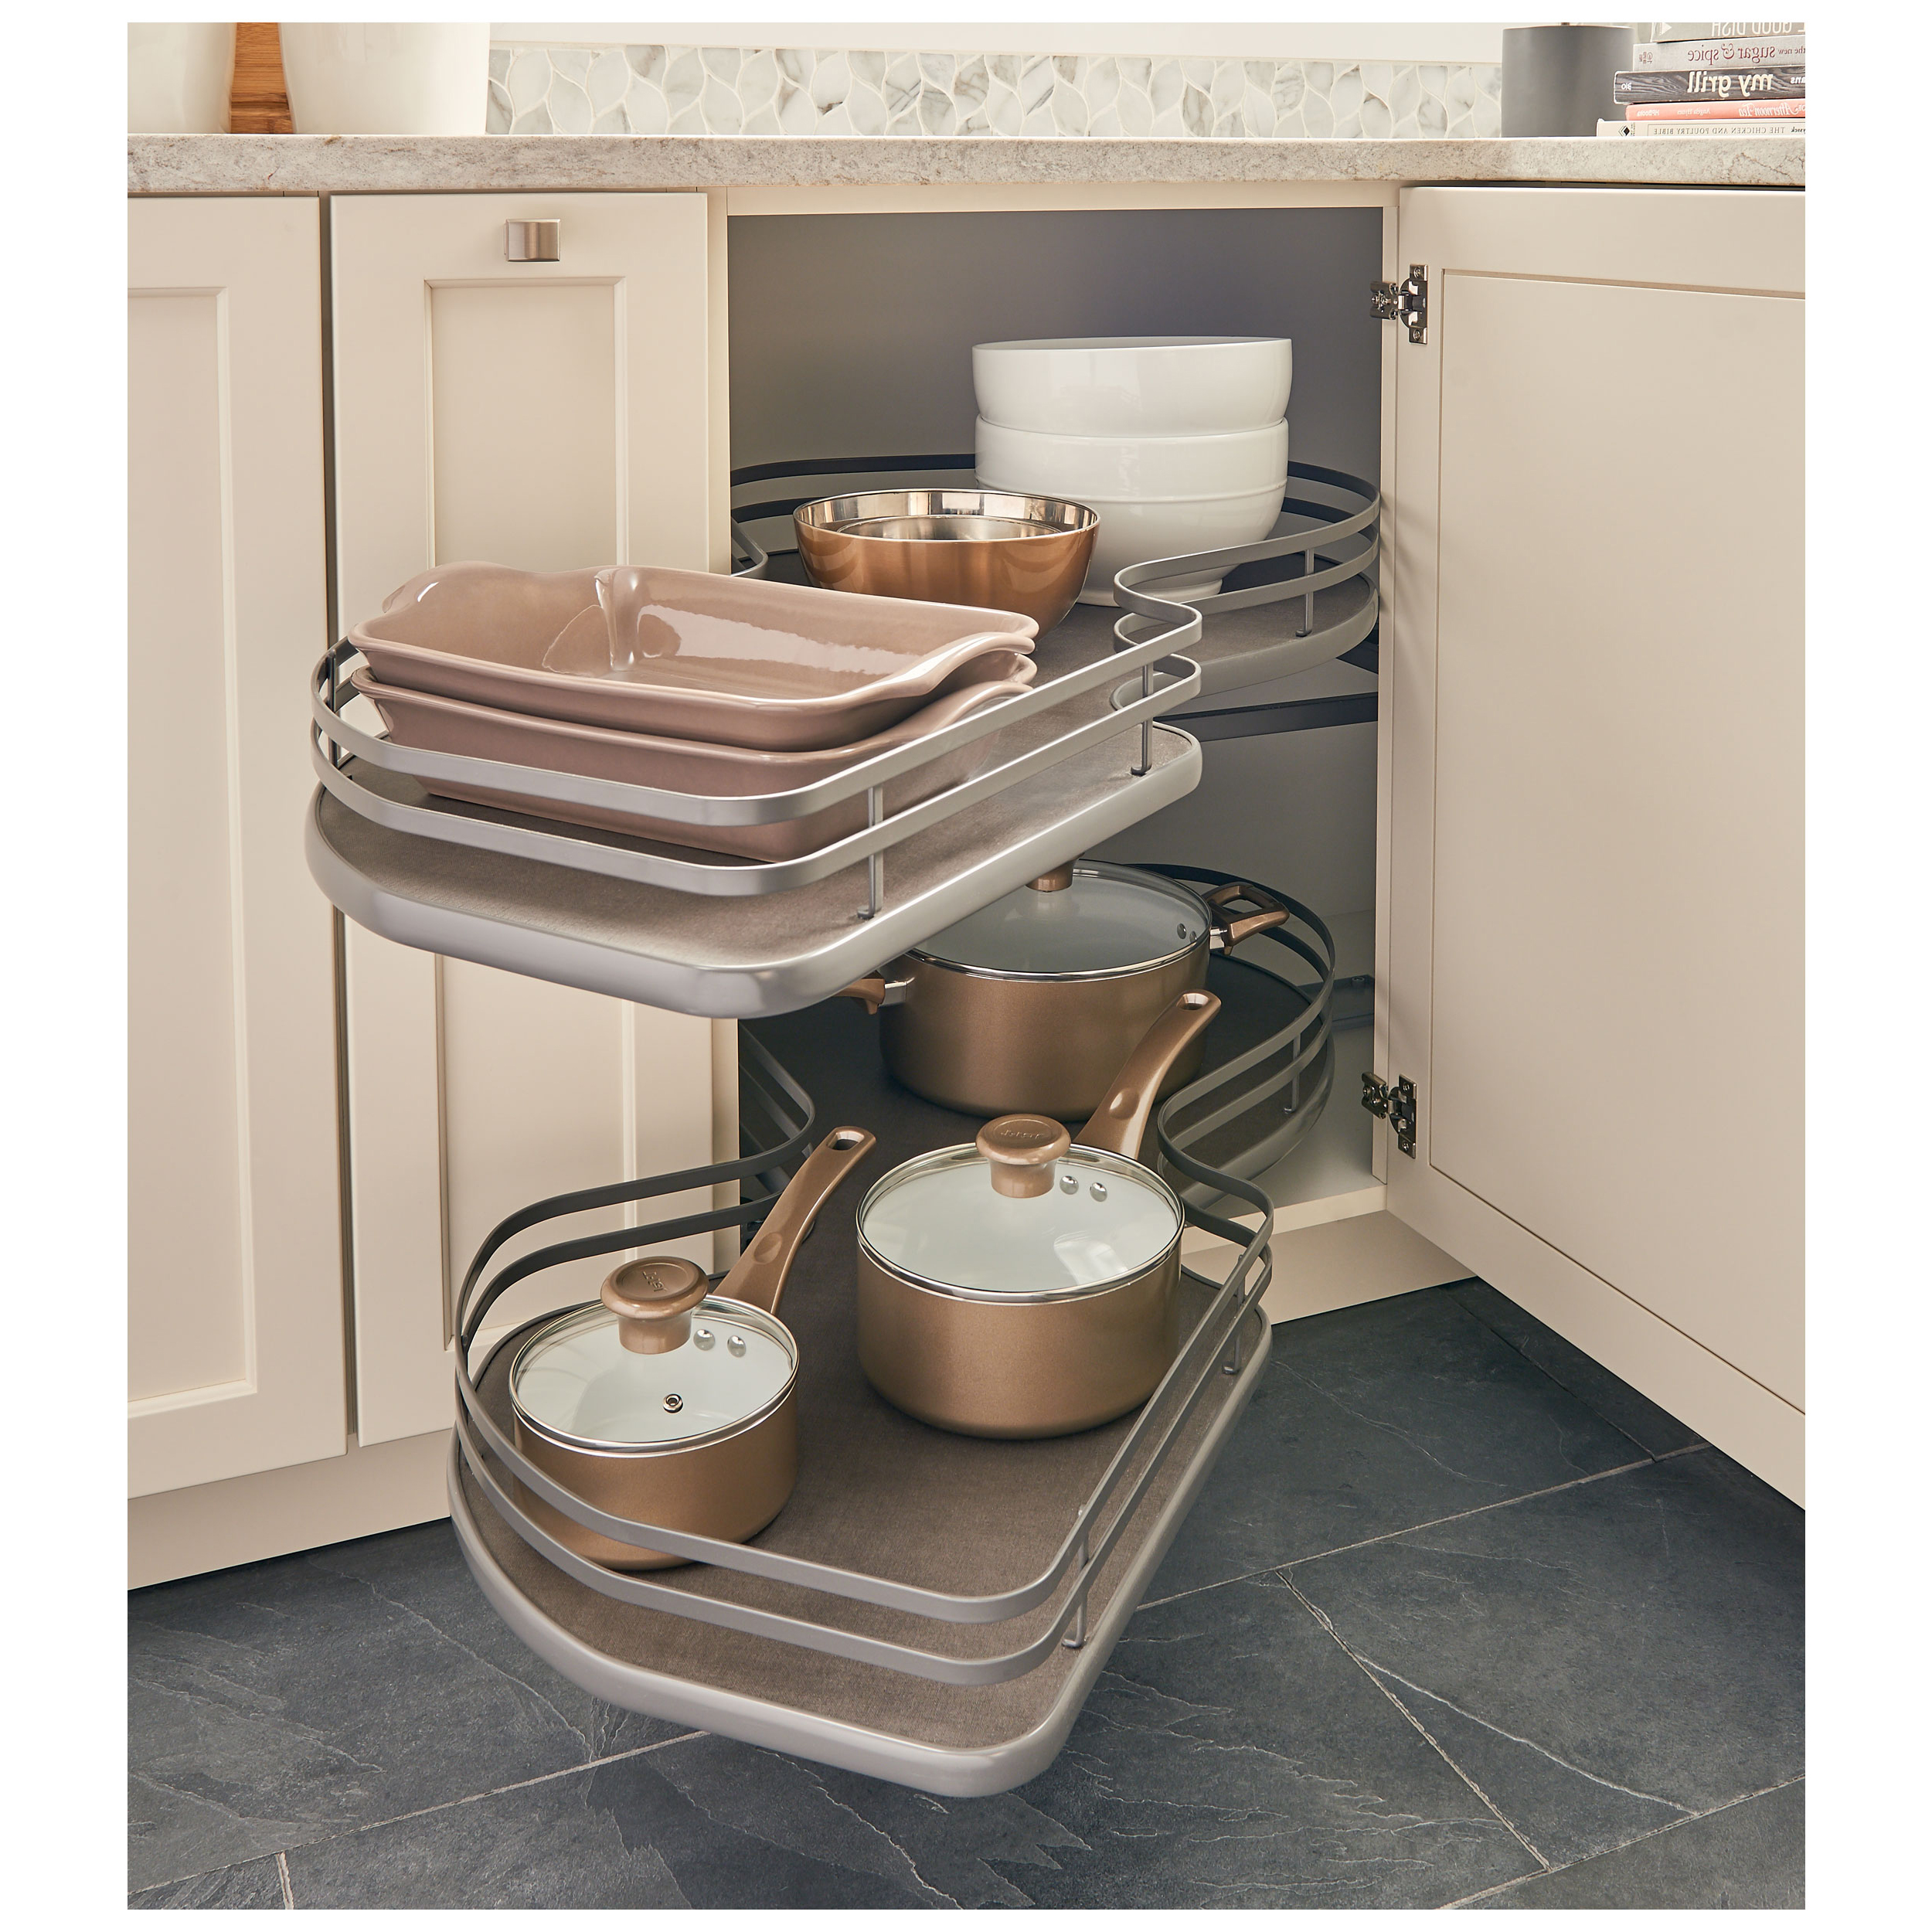 Rev-A-Shelf 5372-21-FOG-L The Cloud 21" Blind Corner Pull-Out, Double-Tier, Orion Gray, Left Hand :: Image 10